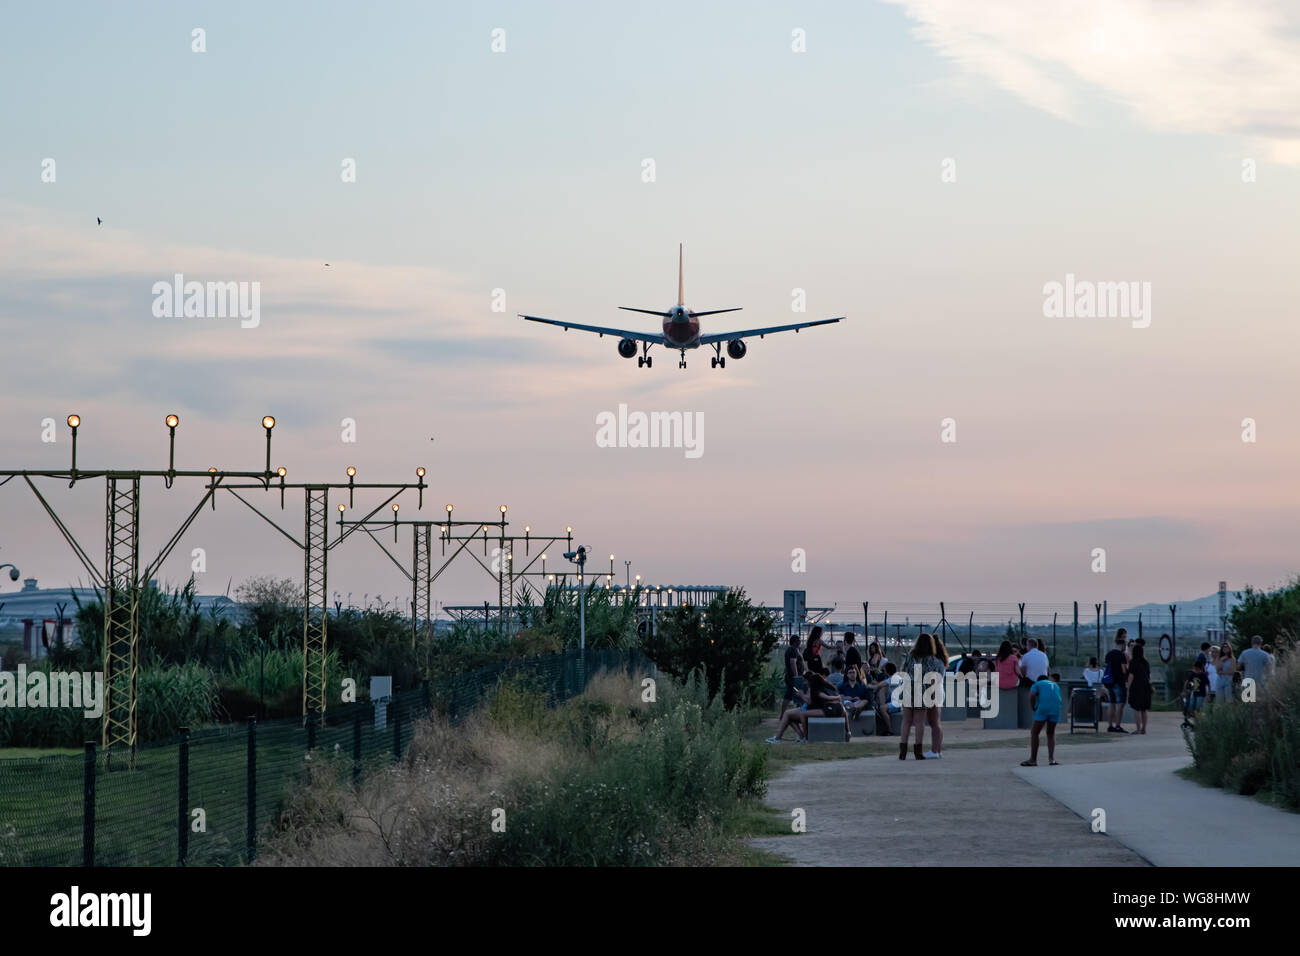 Aircraft landing in El Prat Barcelona airport overflying a group of people Stock Photo